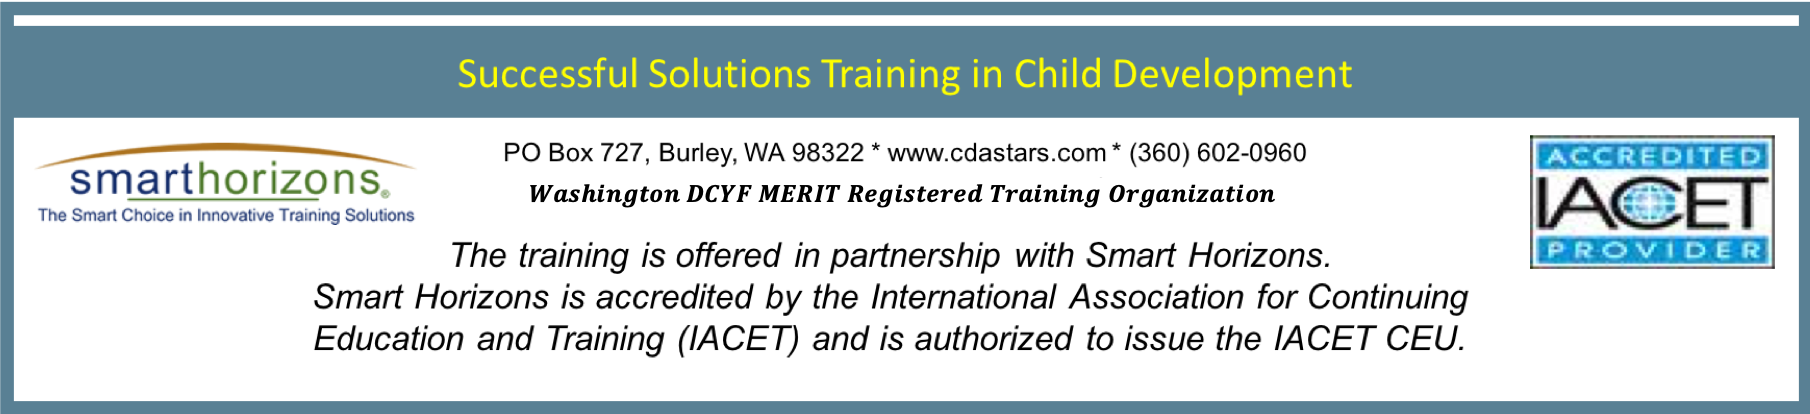 Care Courses offers online training classes for child care providers